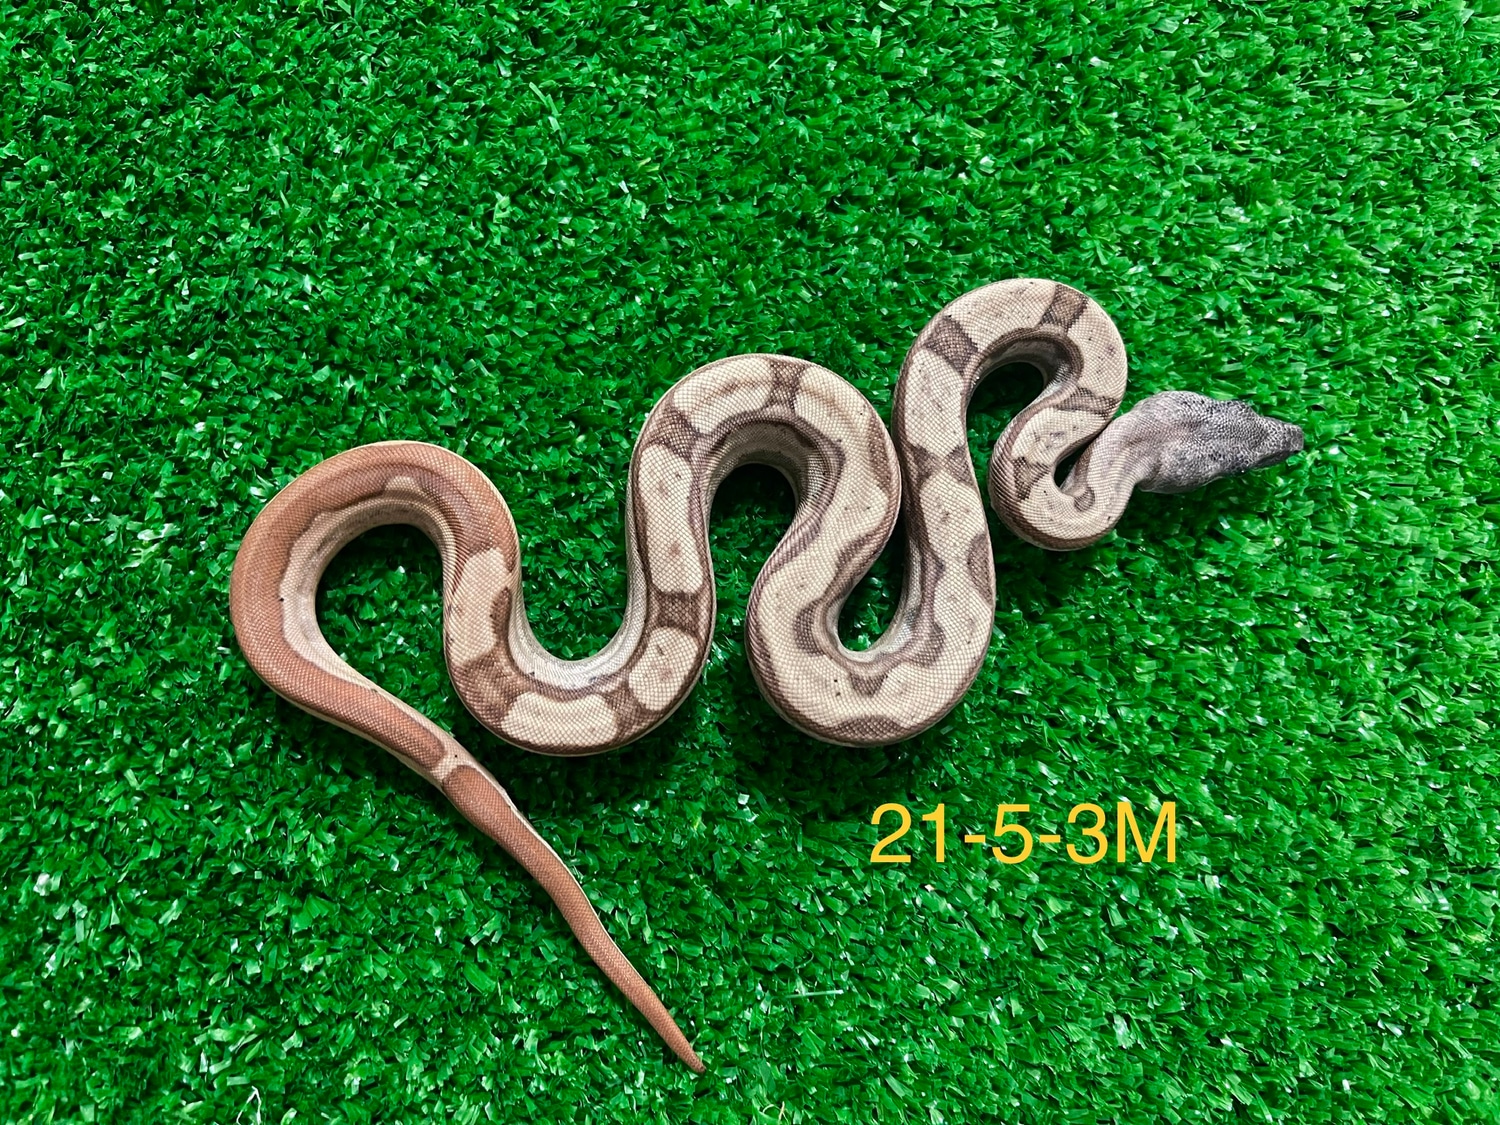 Hypo RLT Harlequin Motley 66% Het Kahl 50% Het Anery (1st Combo Like This Ever Made) Boa Constrictor by S&M Boas